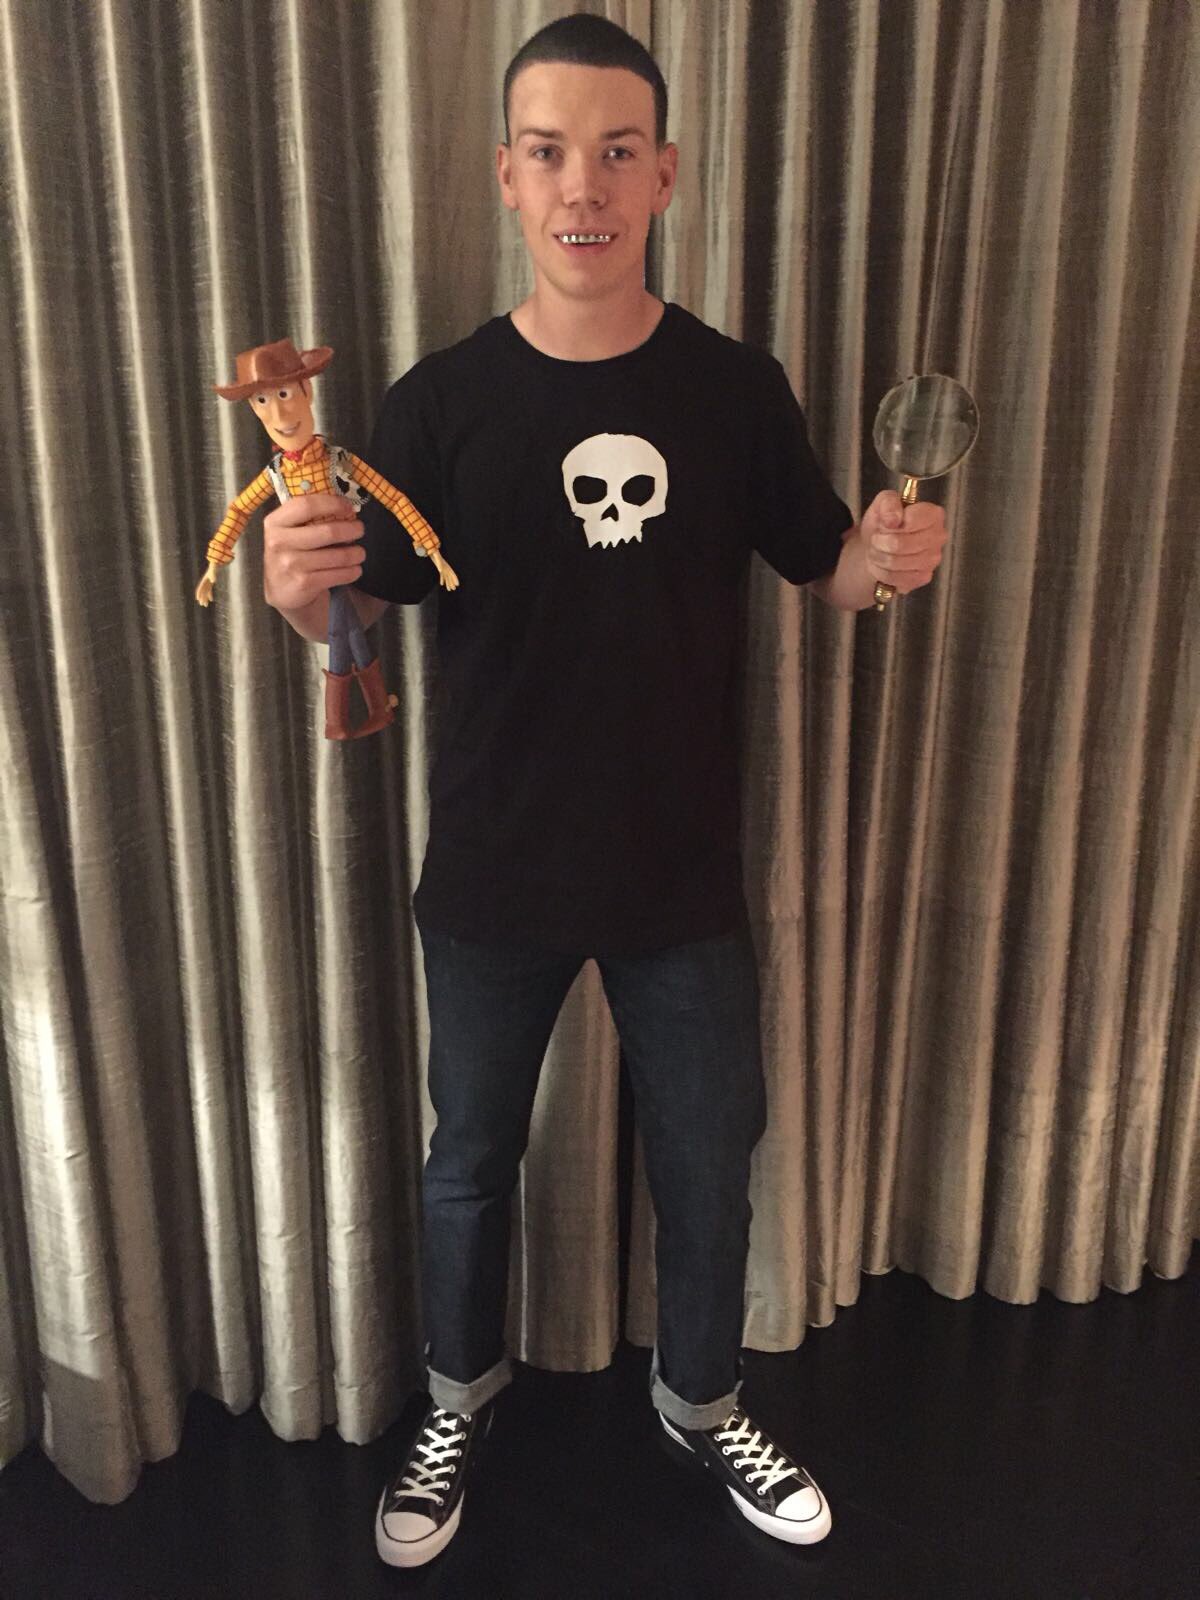 Will Poulter Reveals His Reason for Dressing Up As Sid from "Toy Story" and It's "Heartbreaking"